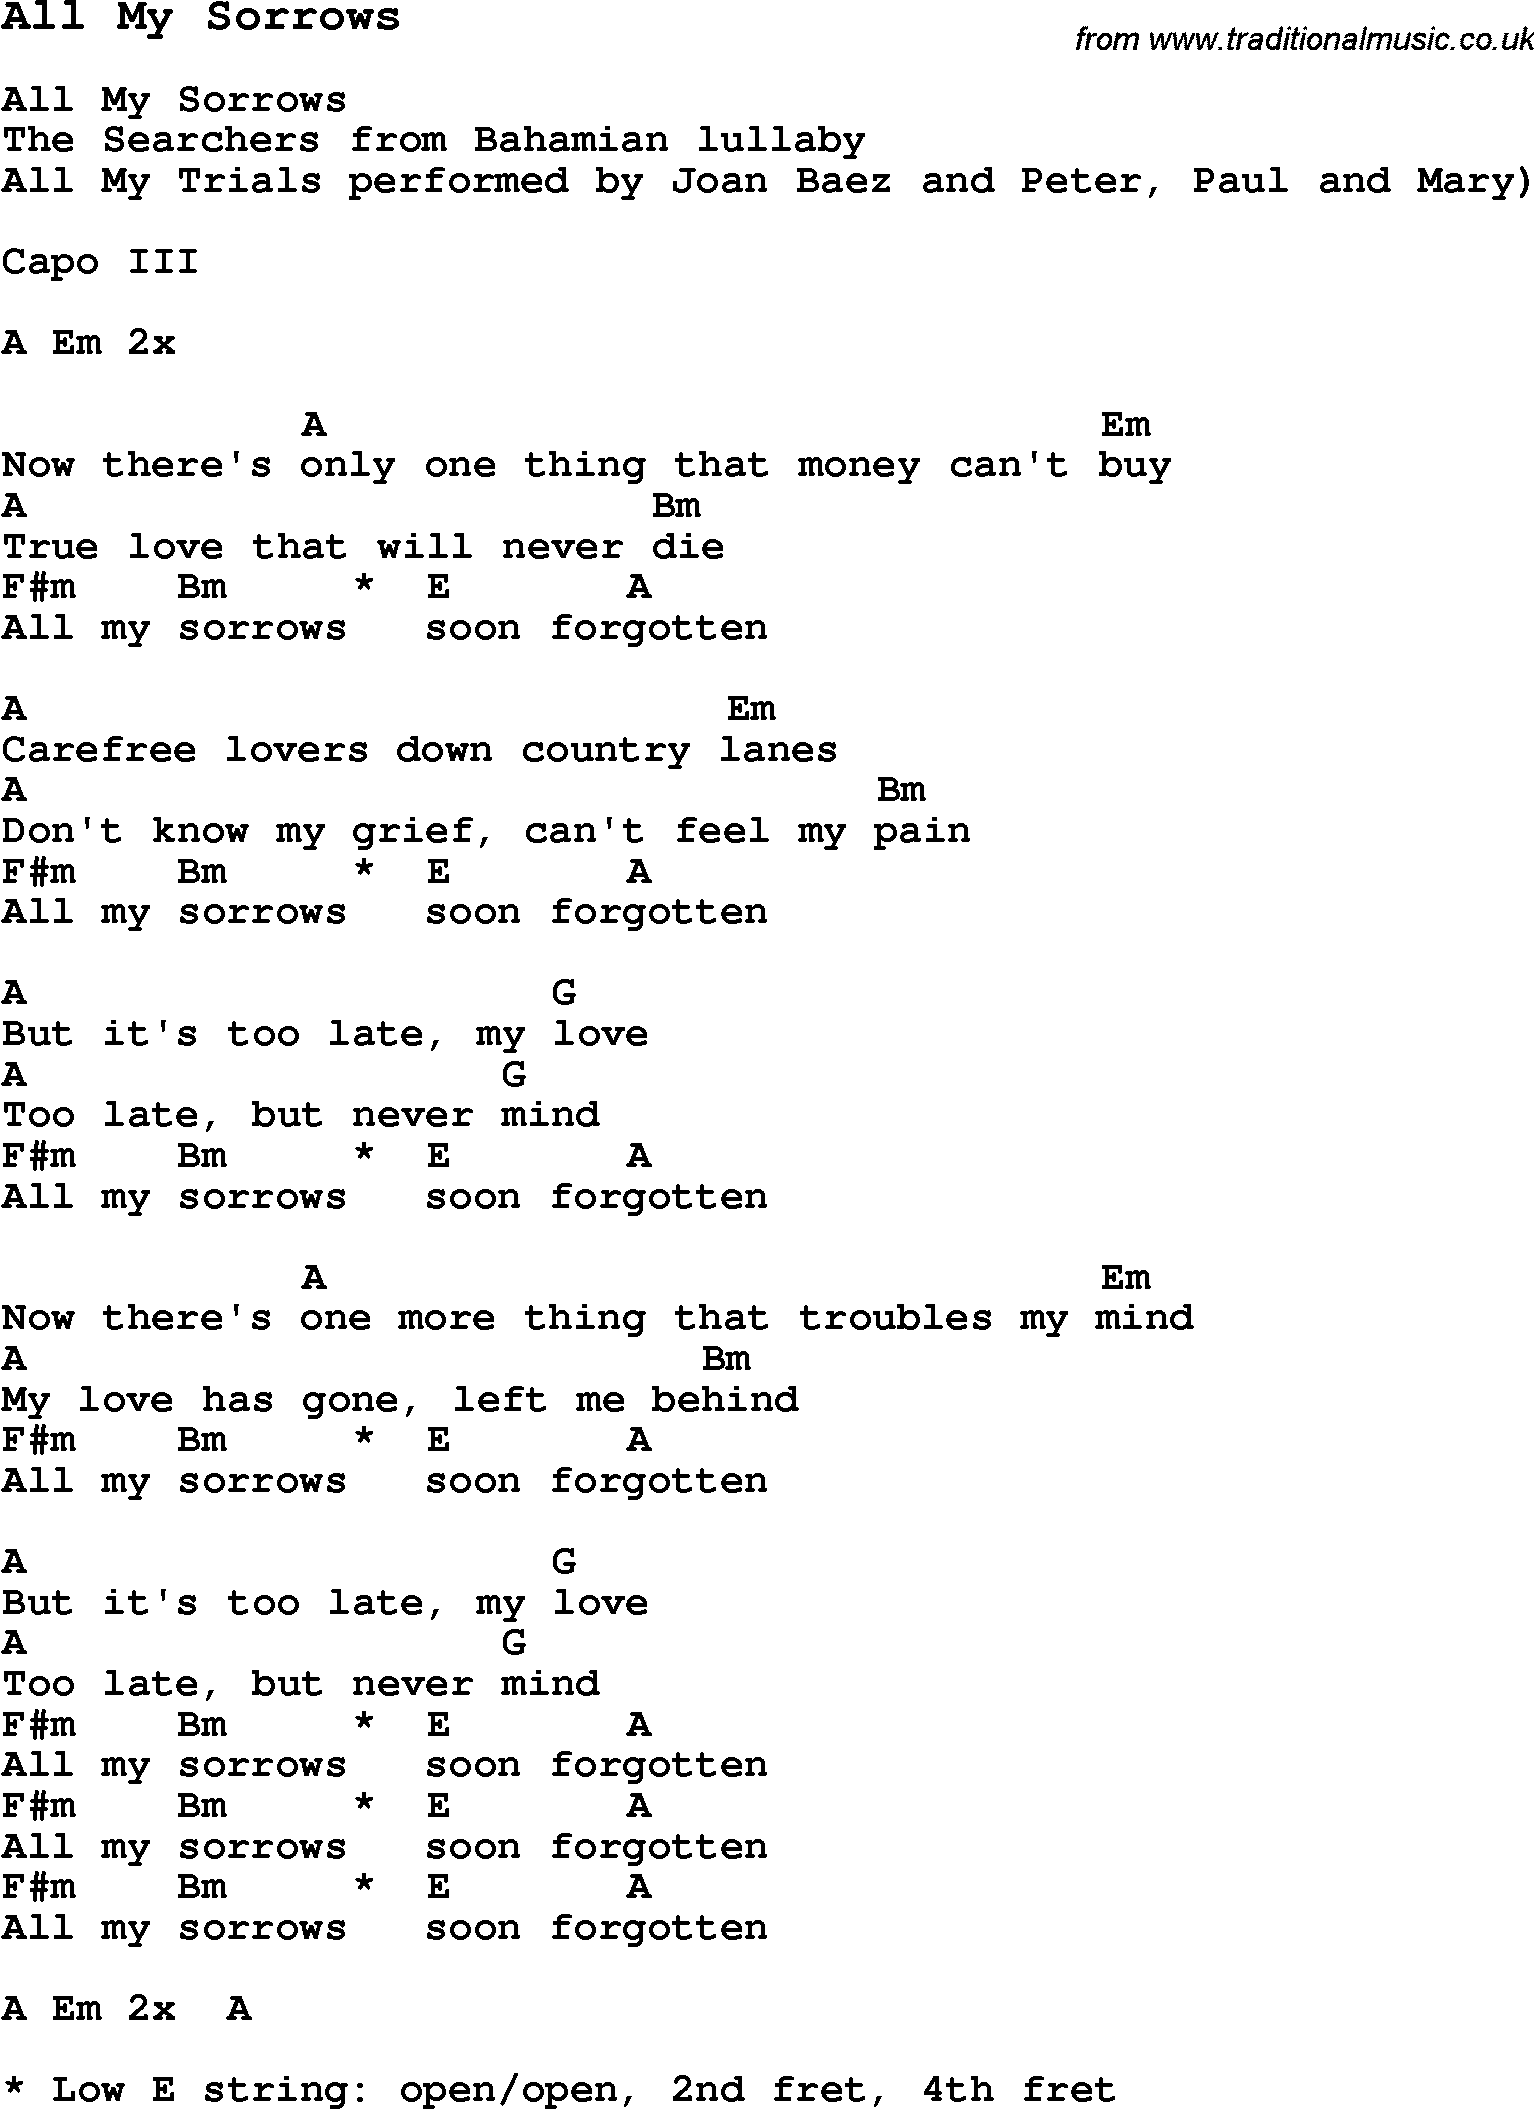 Summer-Camp Song, All My Sorrows, with lyrics and chords for Ukulele, Guitar Banjo etc.